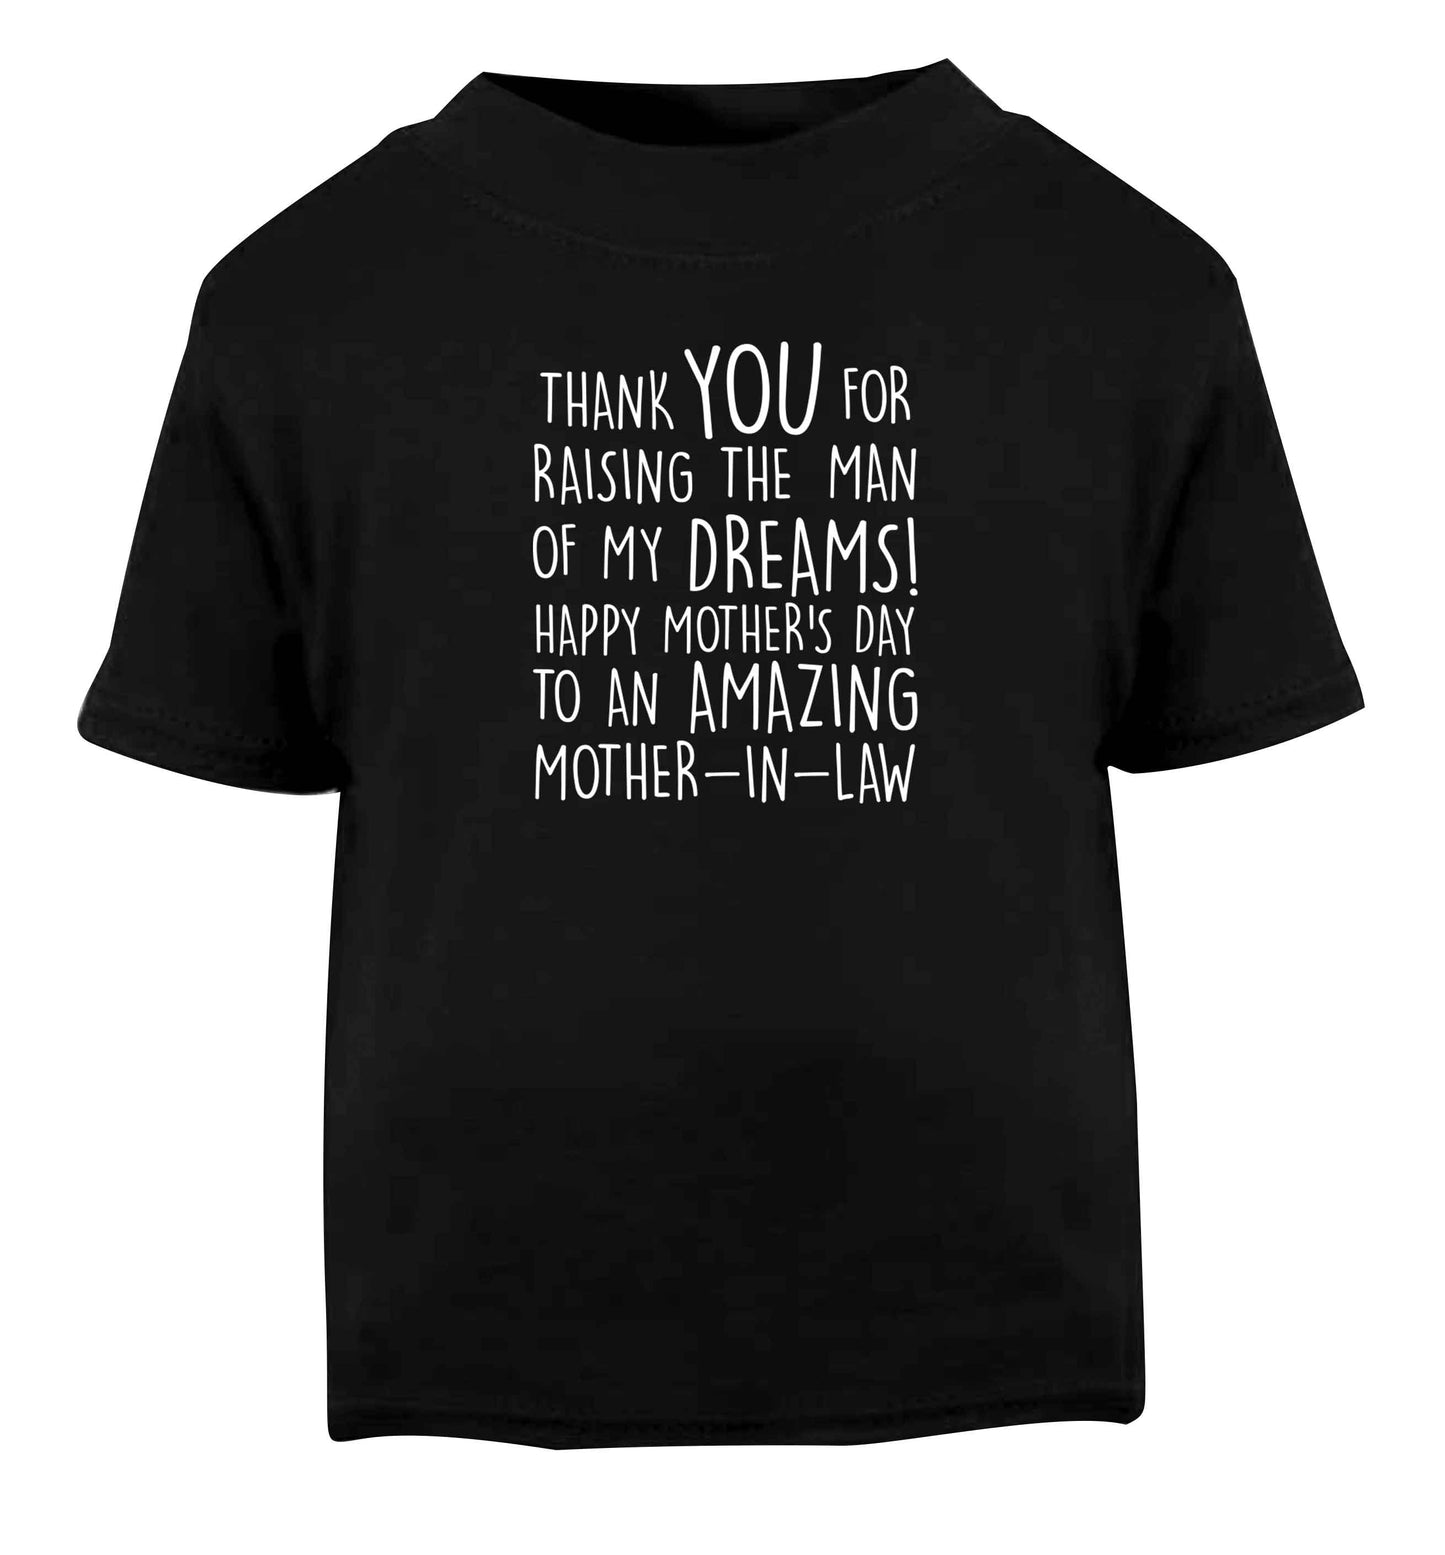 Raising the man of my dreams mother's day mother-in-law Black baby toddler Tshirt 2 years